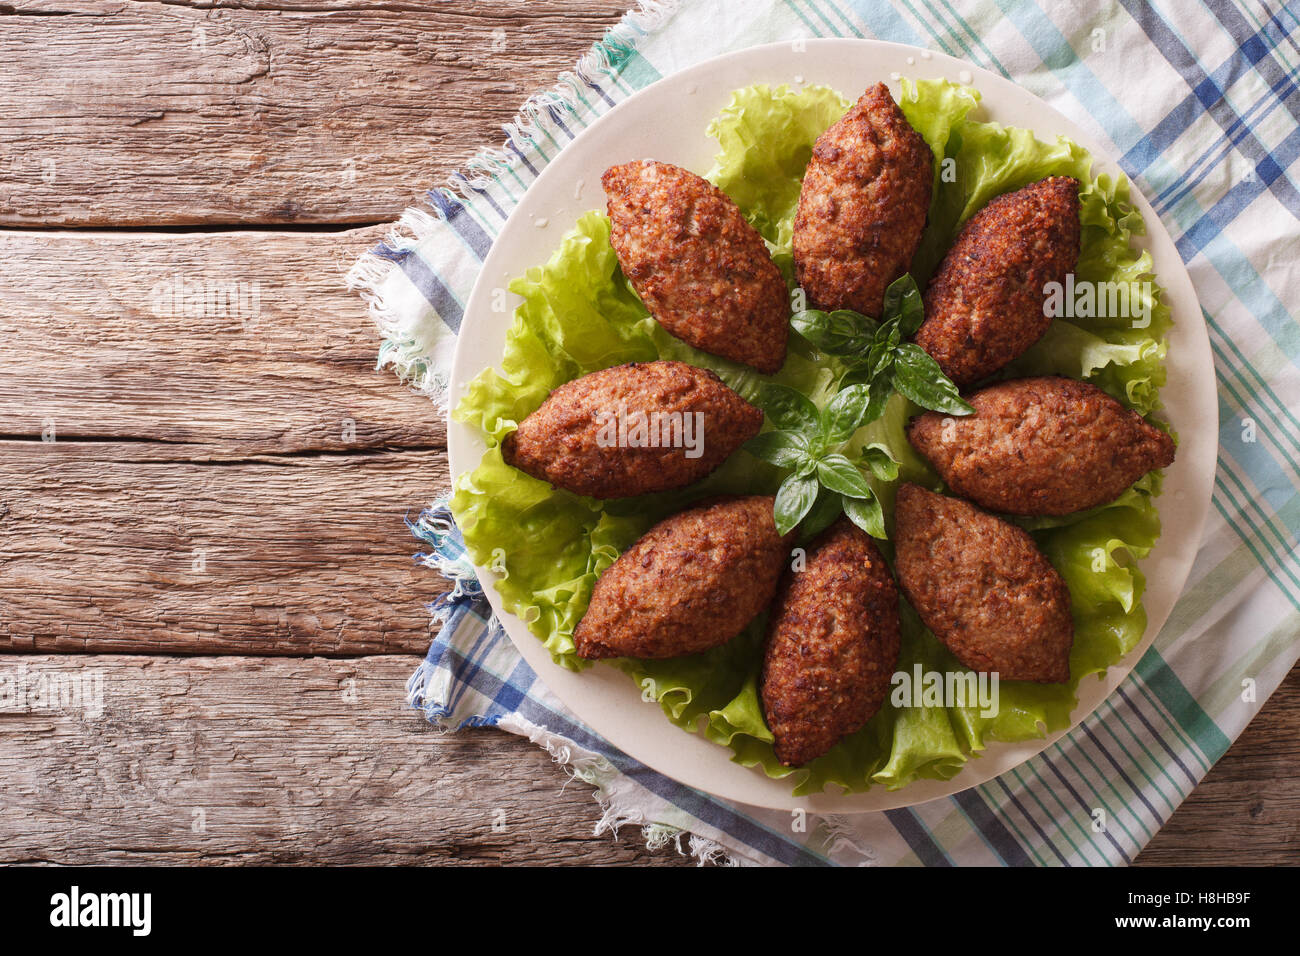 Arabic cuisine: meat appetizer kibbeh close-up on a plate. Horizontal view from above Stock Photo